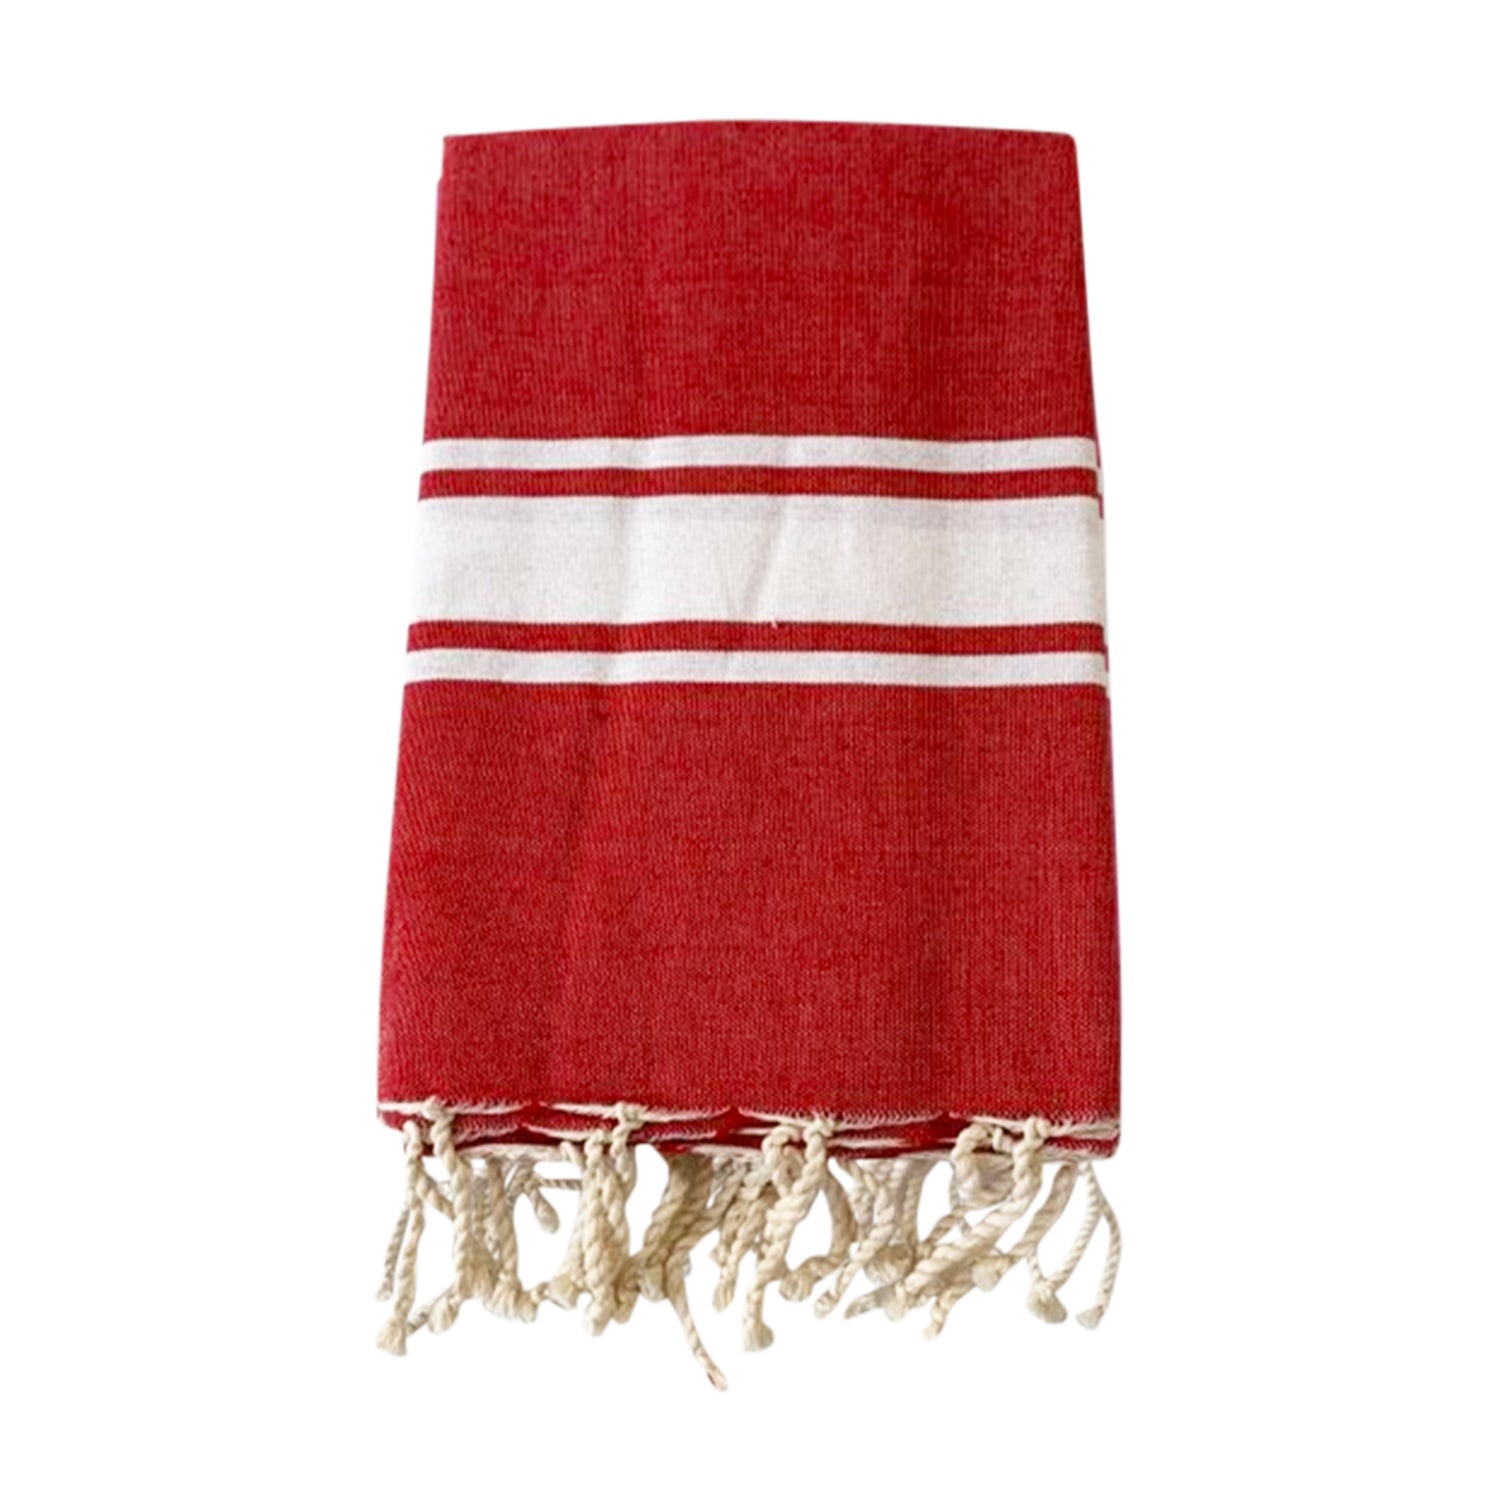 Fouta traditionnelle Kozo Rouge 200x200 190g/m²